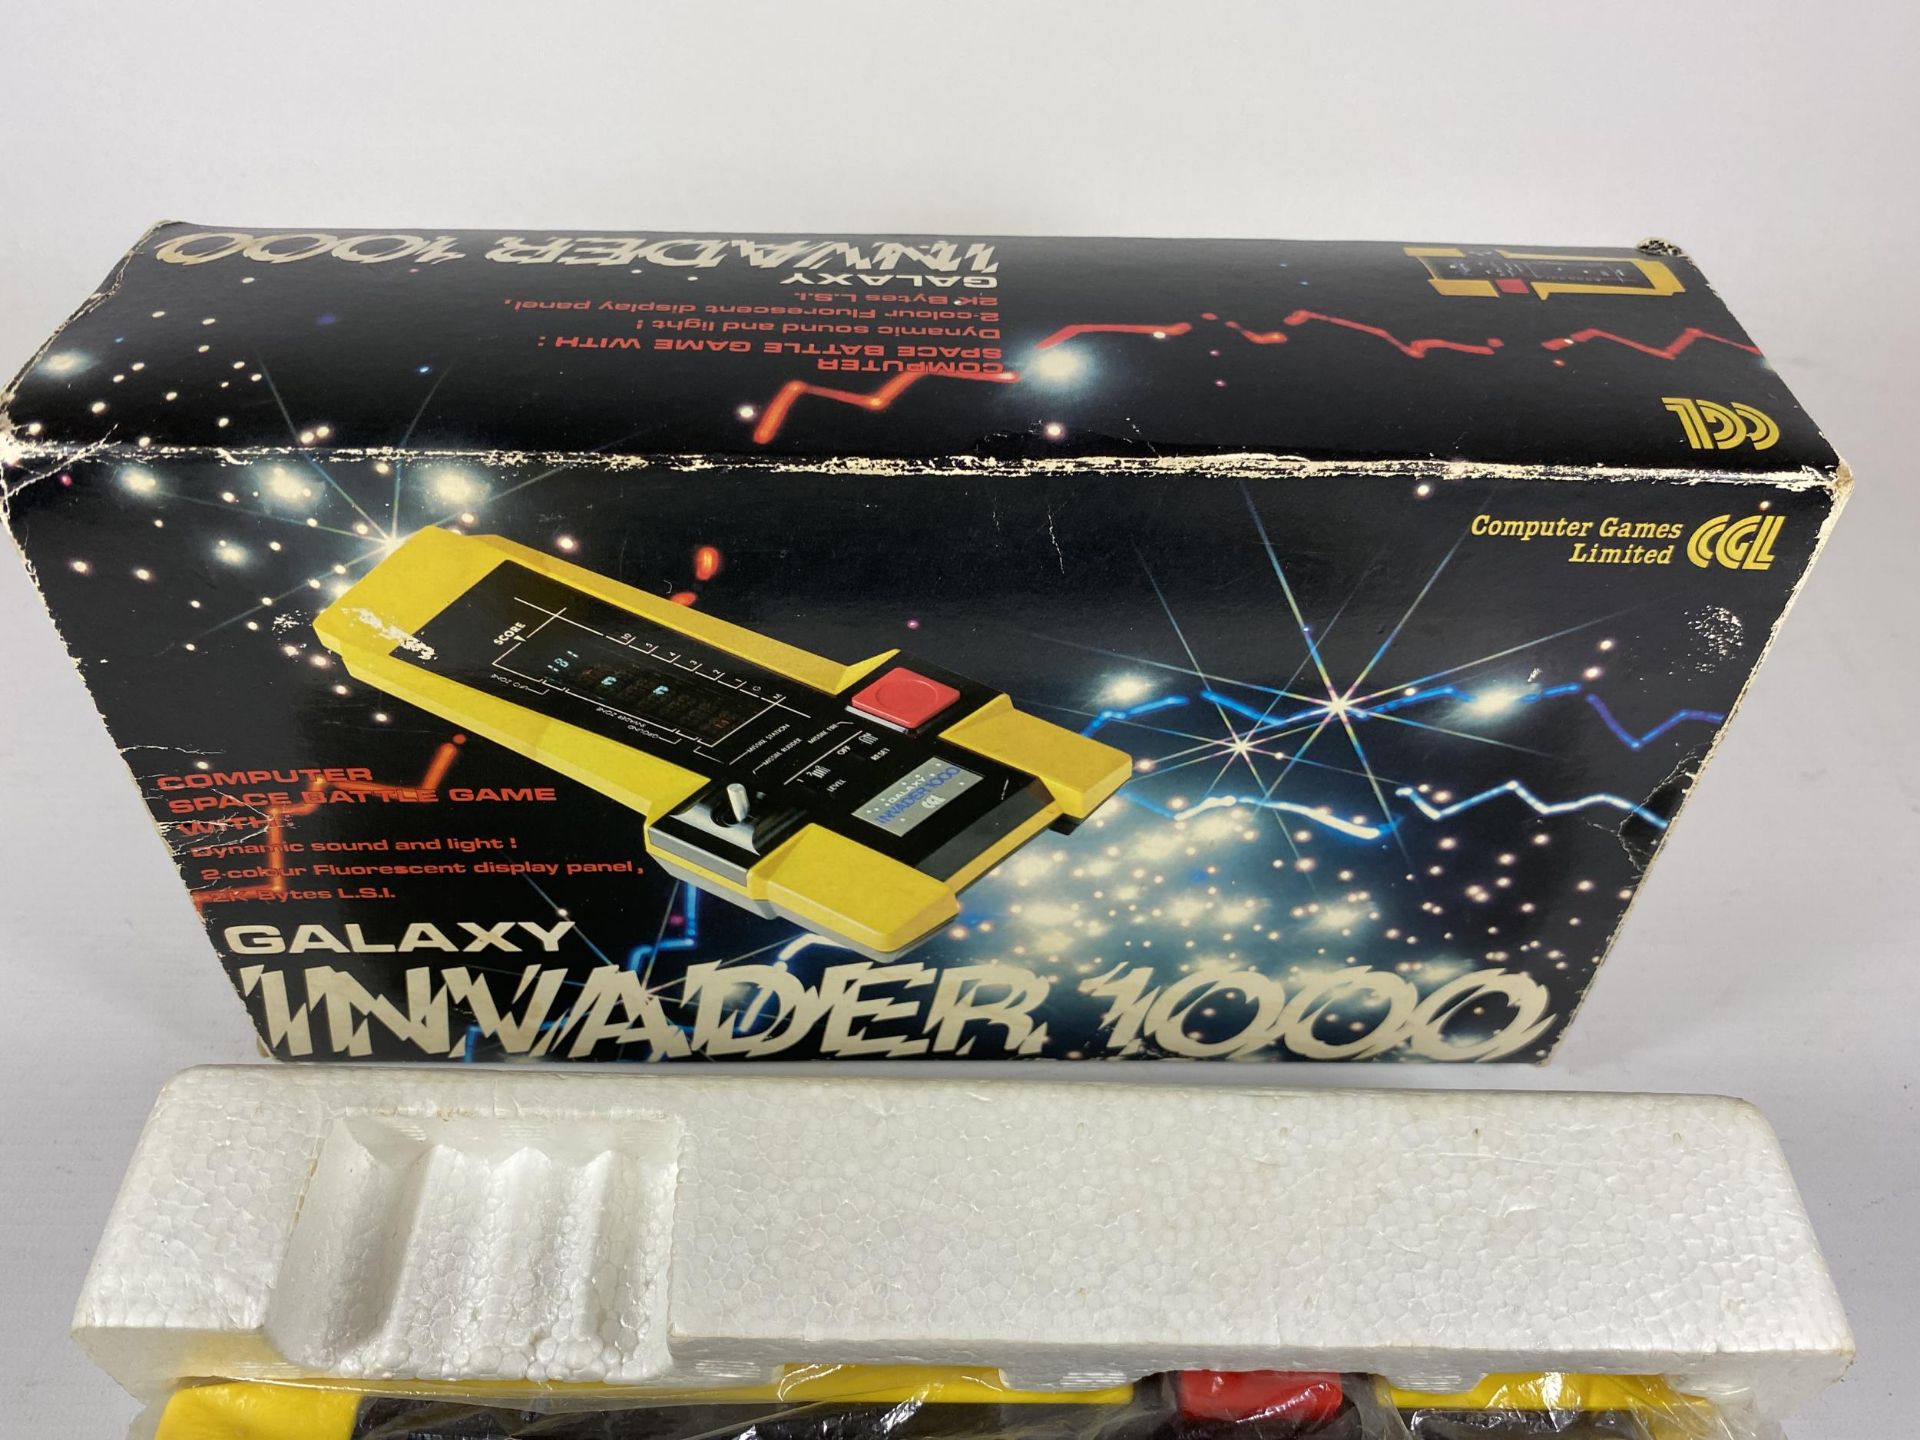 A RETRO BOXED CGL GALAXY INVADER 1000 ARCADE GAME - Image 2 of 3